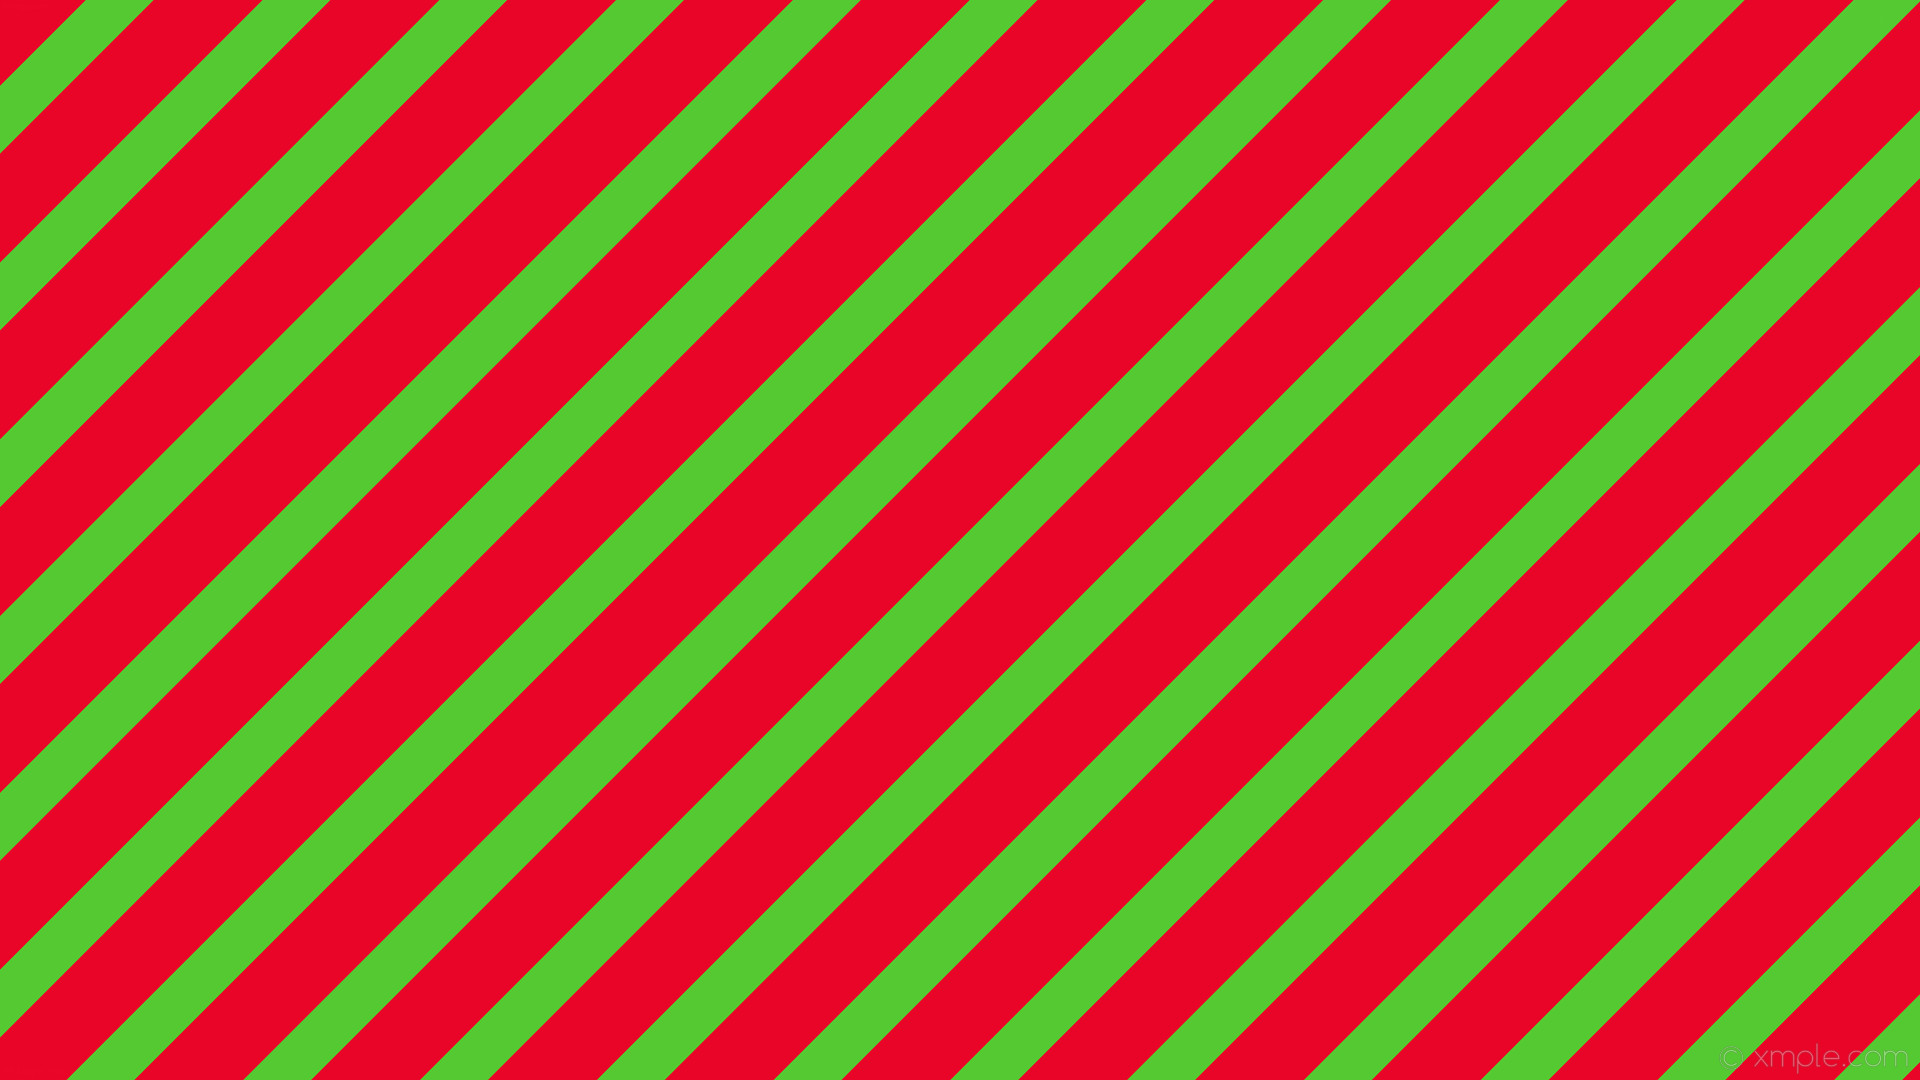 Wallpaper Red and green abstract background 1920x1200 HD Picture Image